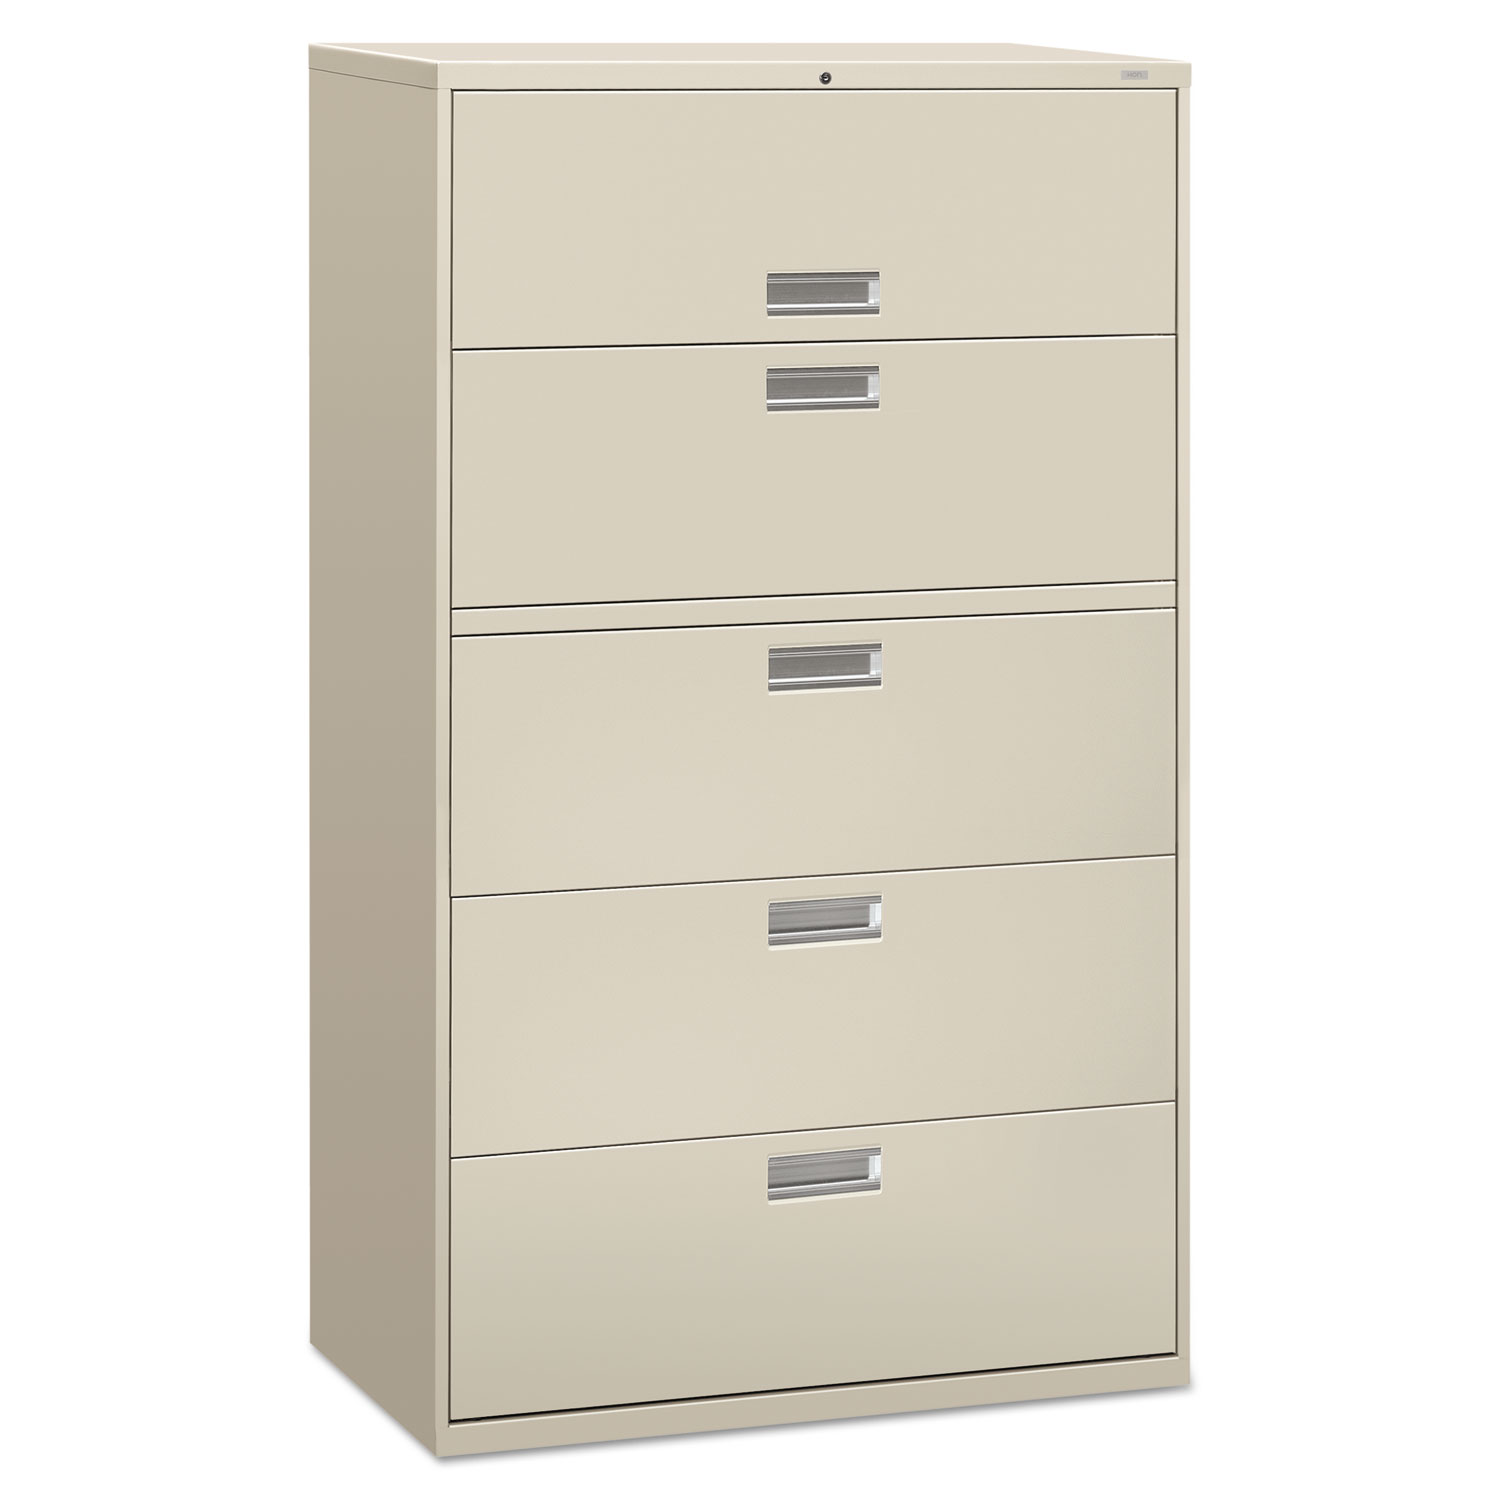 600 Series Five-Drawer Lateral File, 42w x 18d x 64 1/4h, Light Gray